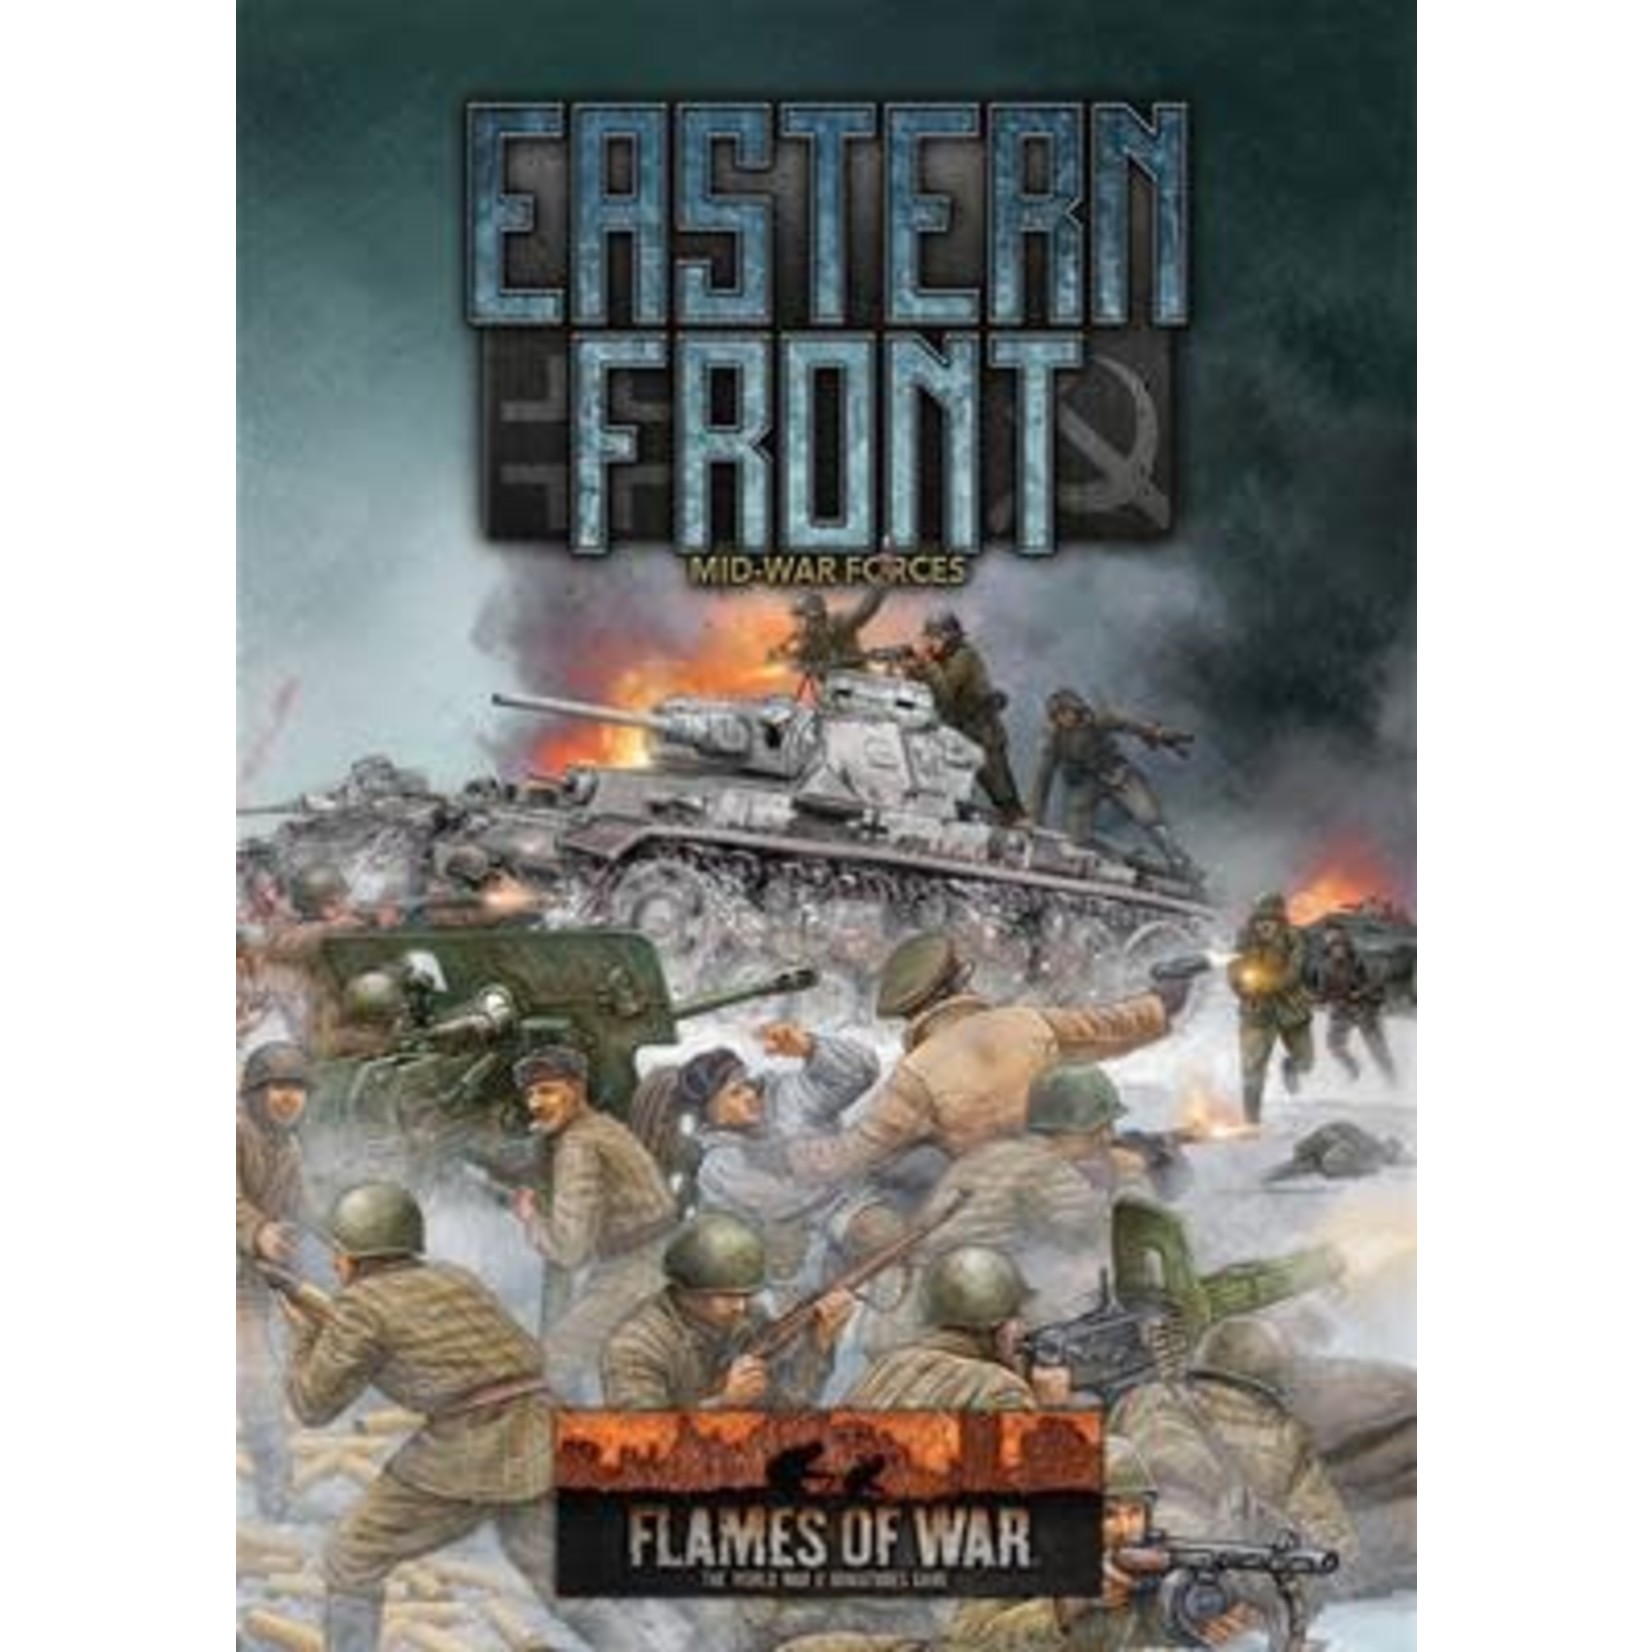 Flames of War Flames of War: Eastern Front Mid-War Forces